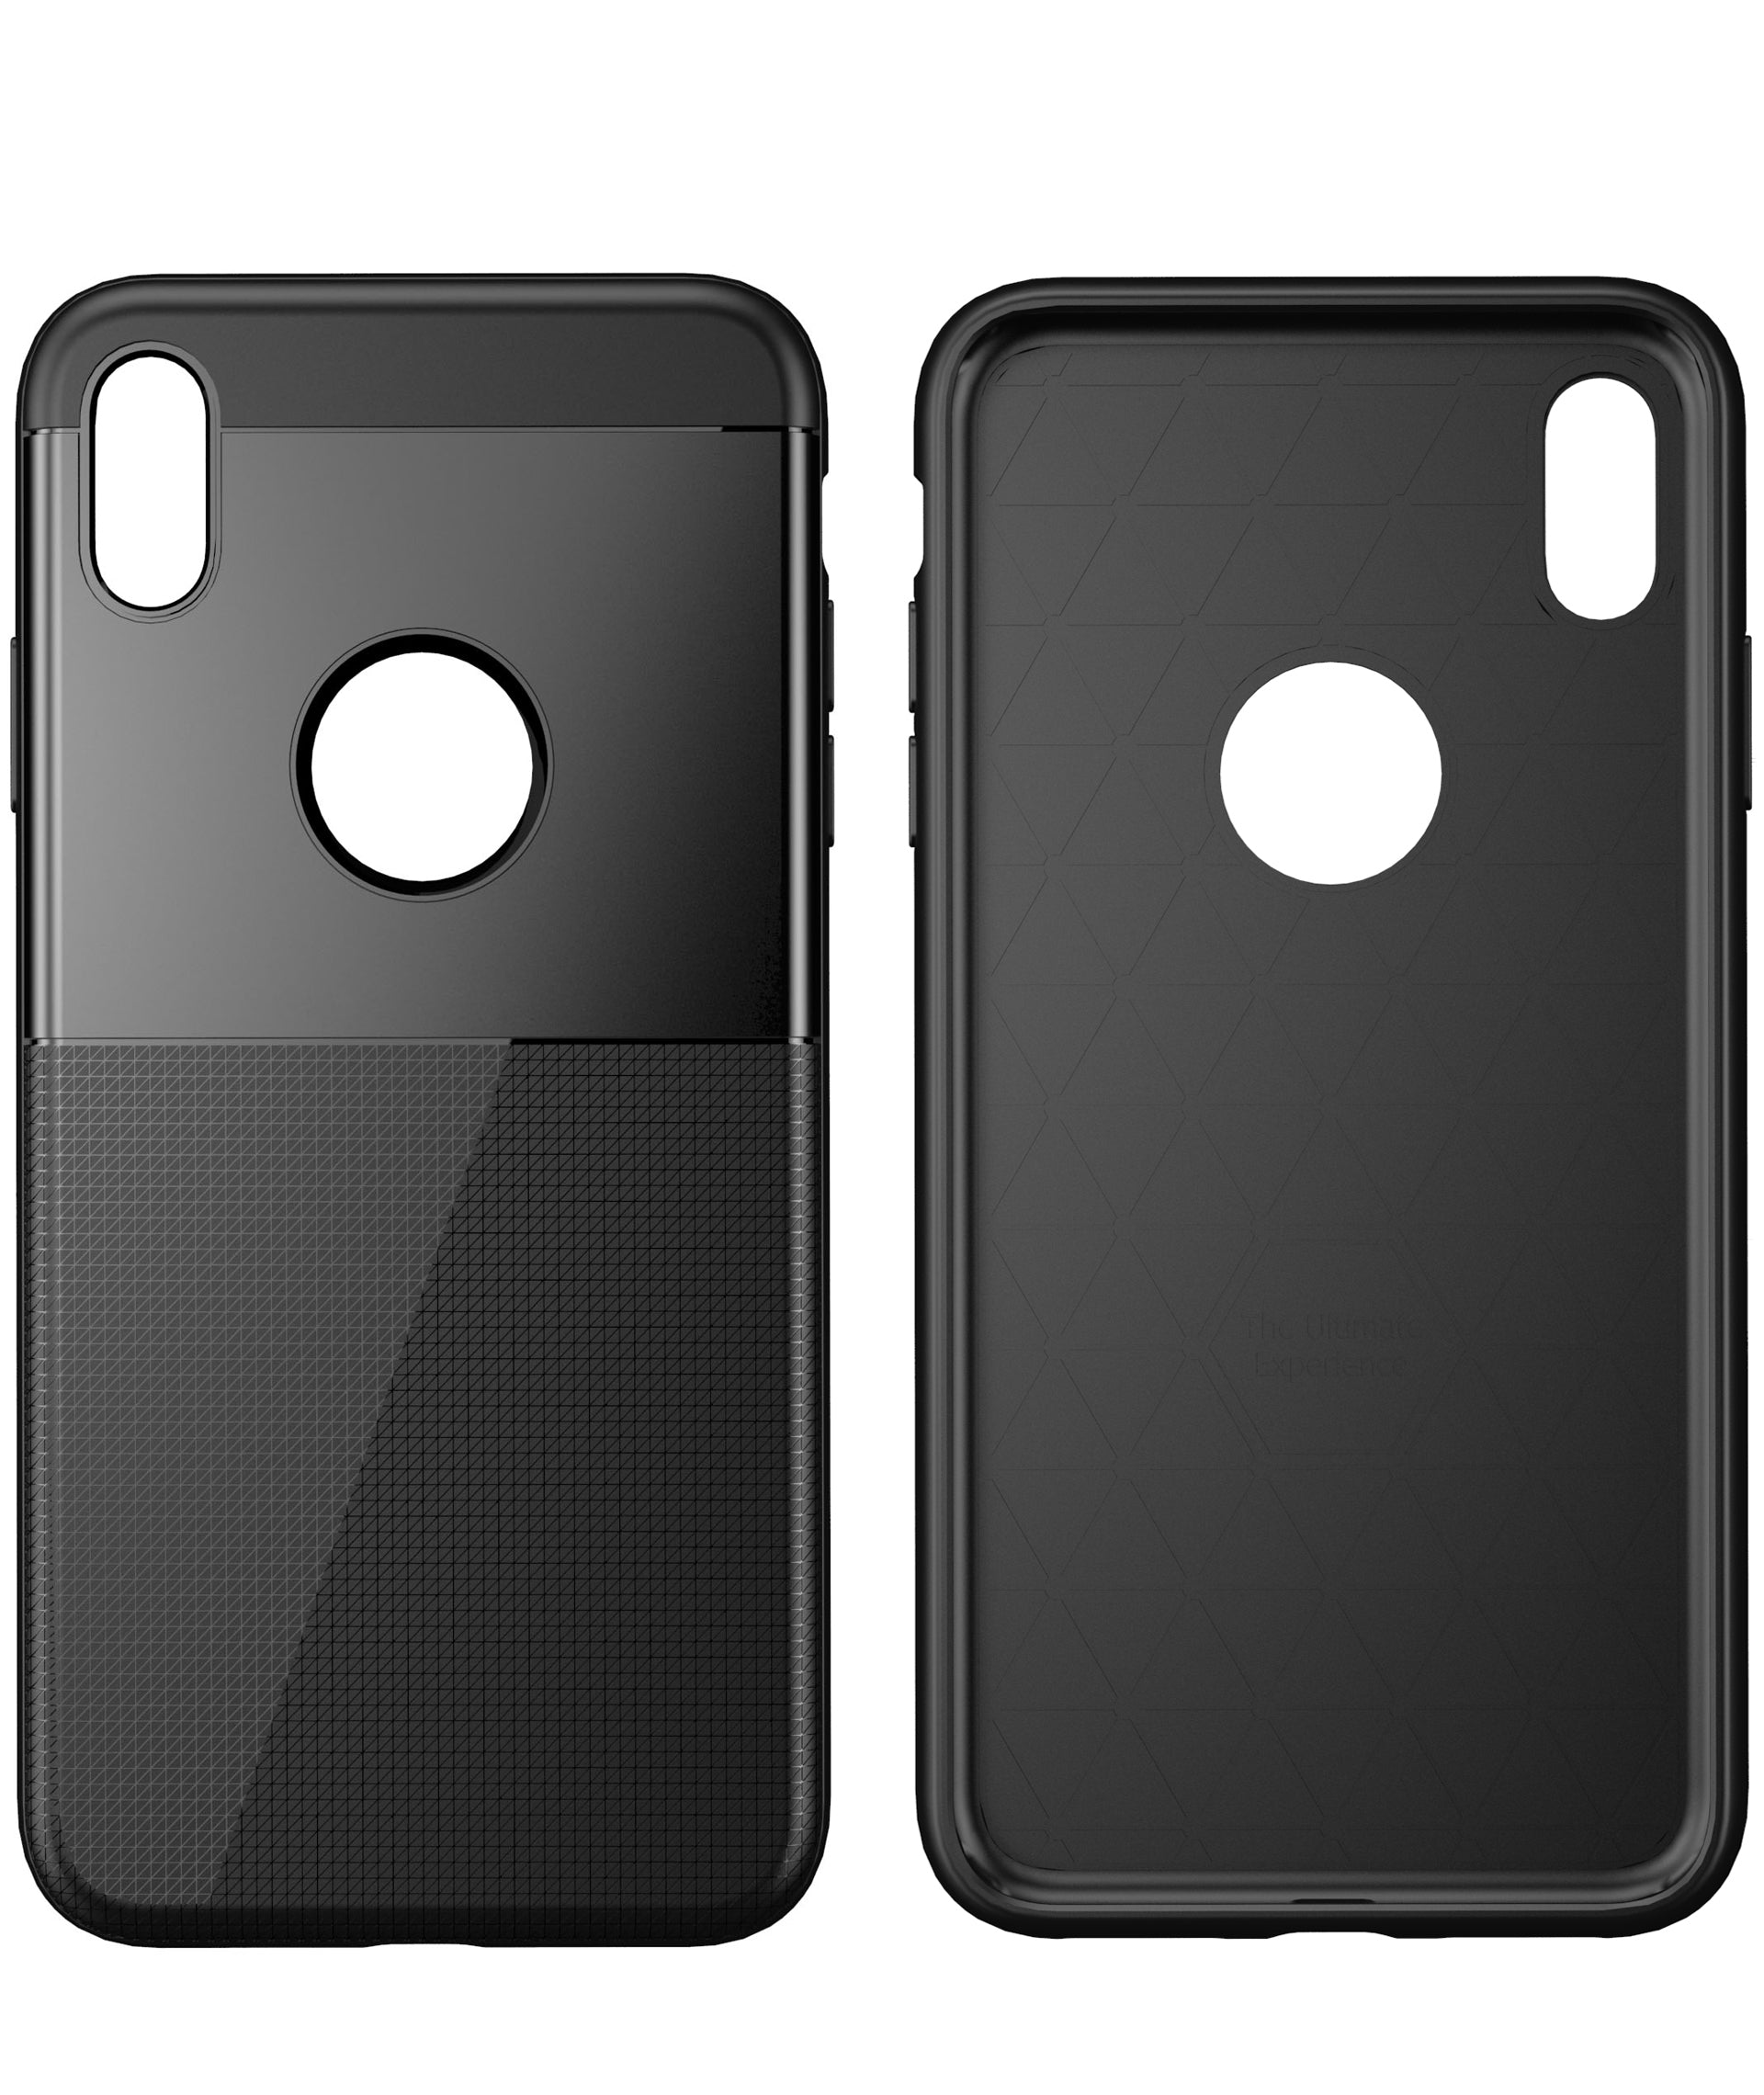 Luvvitt Sleek Armor Case for iPhone XR with 6.1 inch Screen 2018 - Black